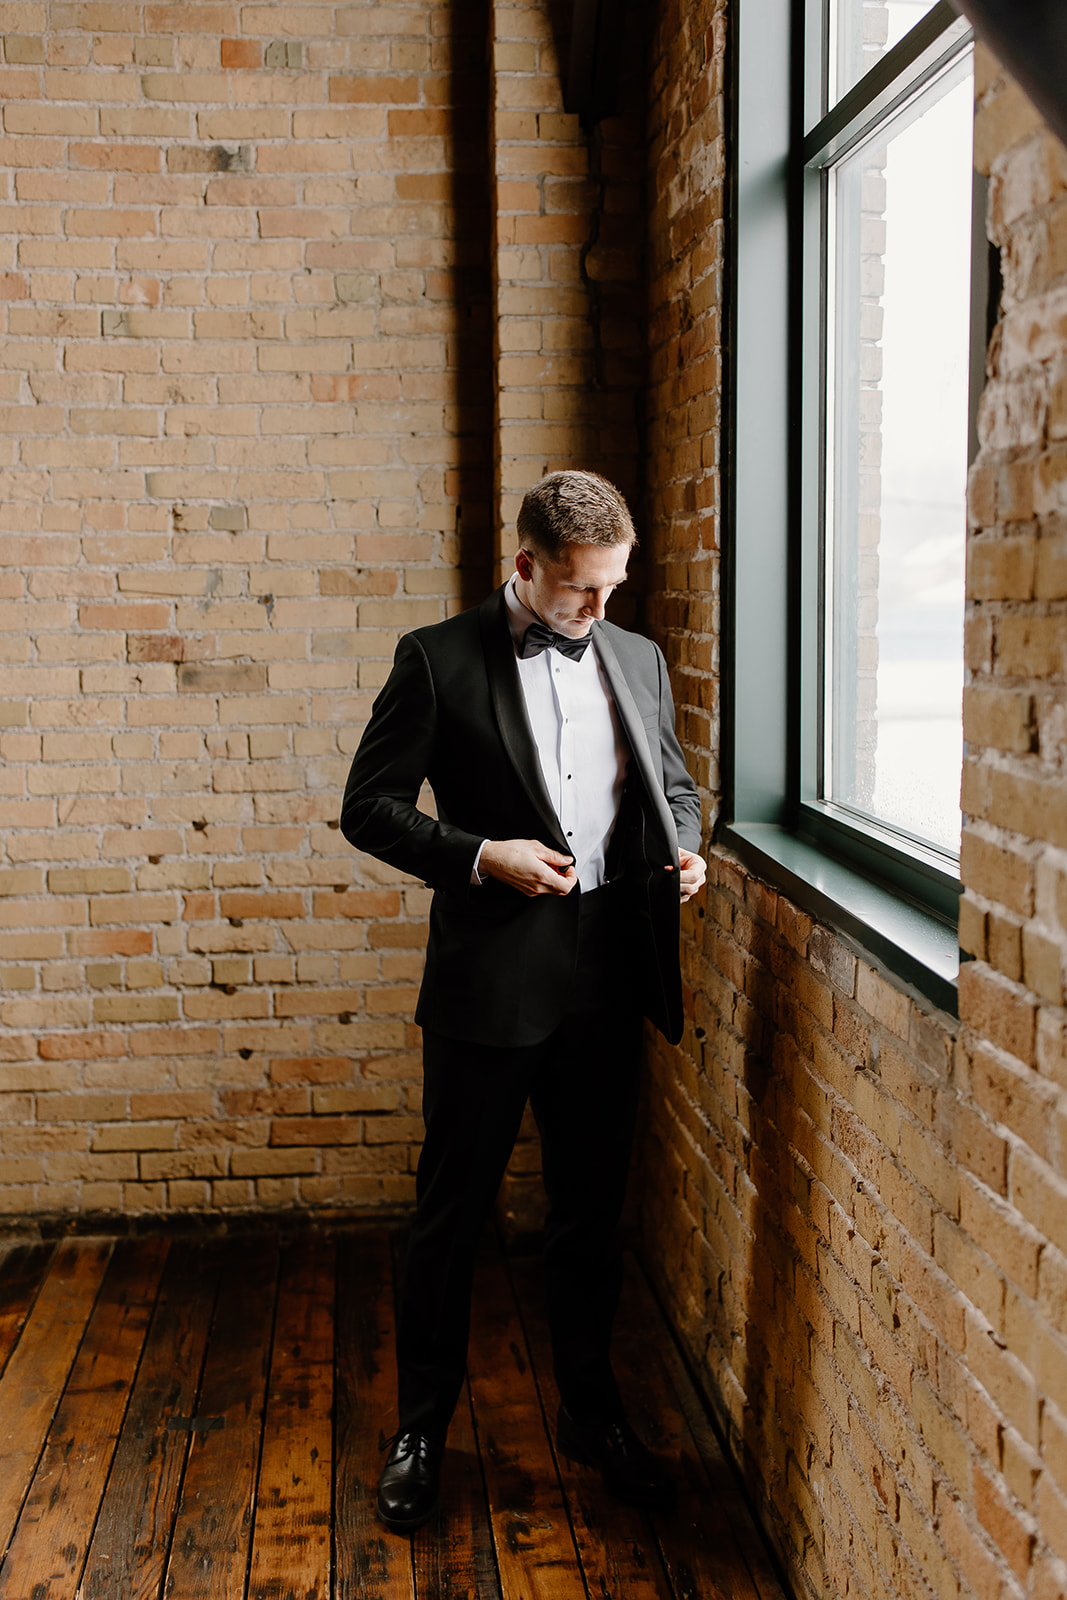 Groom buttoning his jacket in front of a window